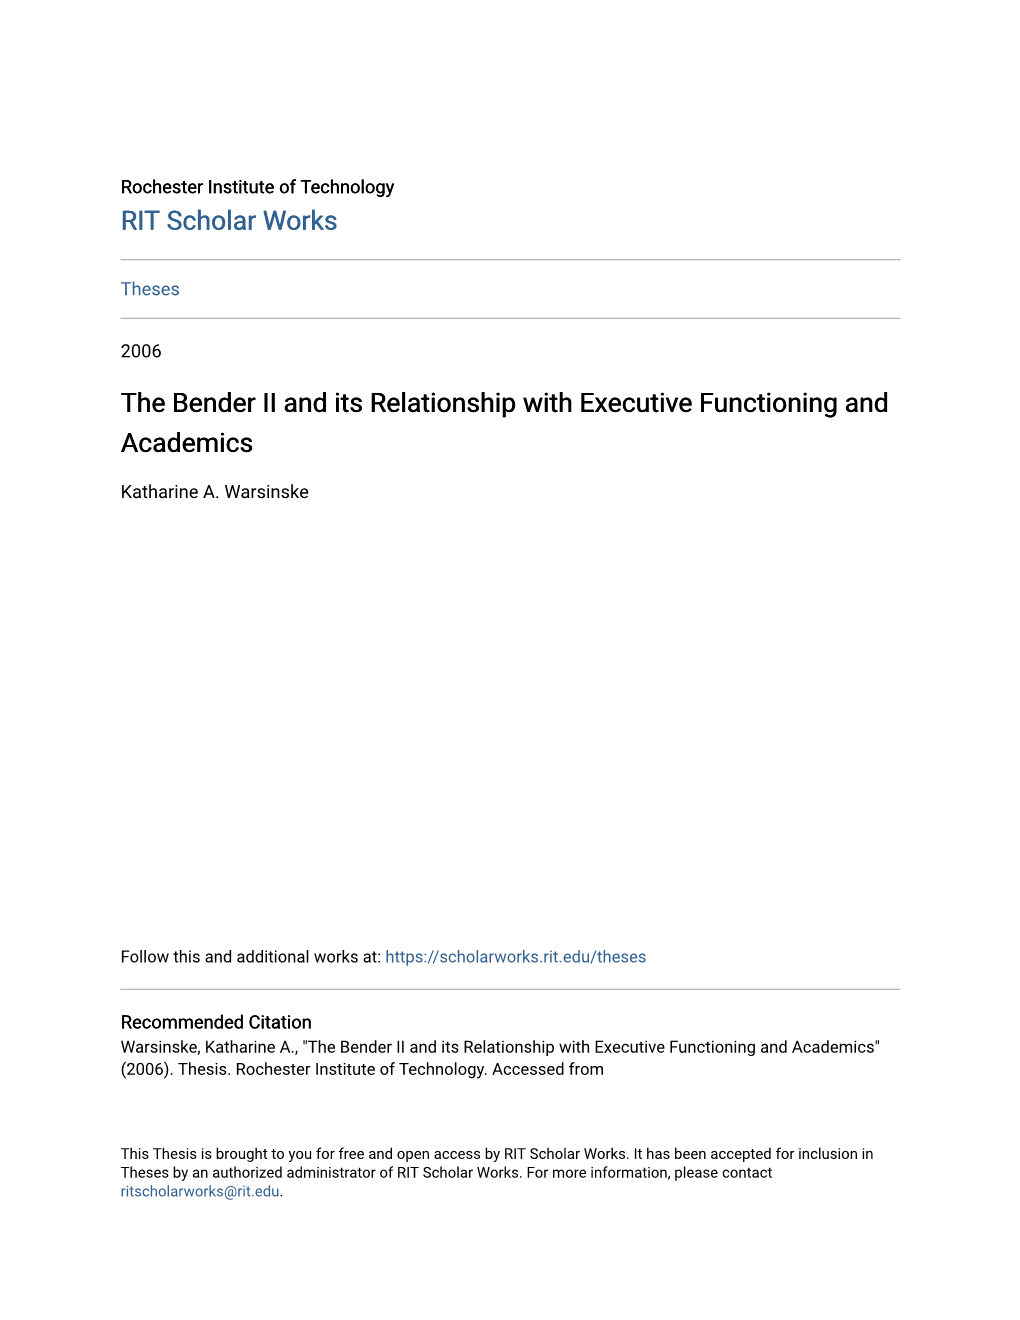 The Bender II and Its Relationship with Executive Functioning and Academics